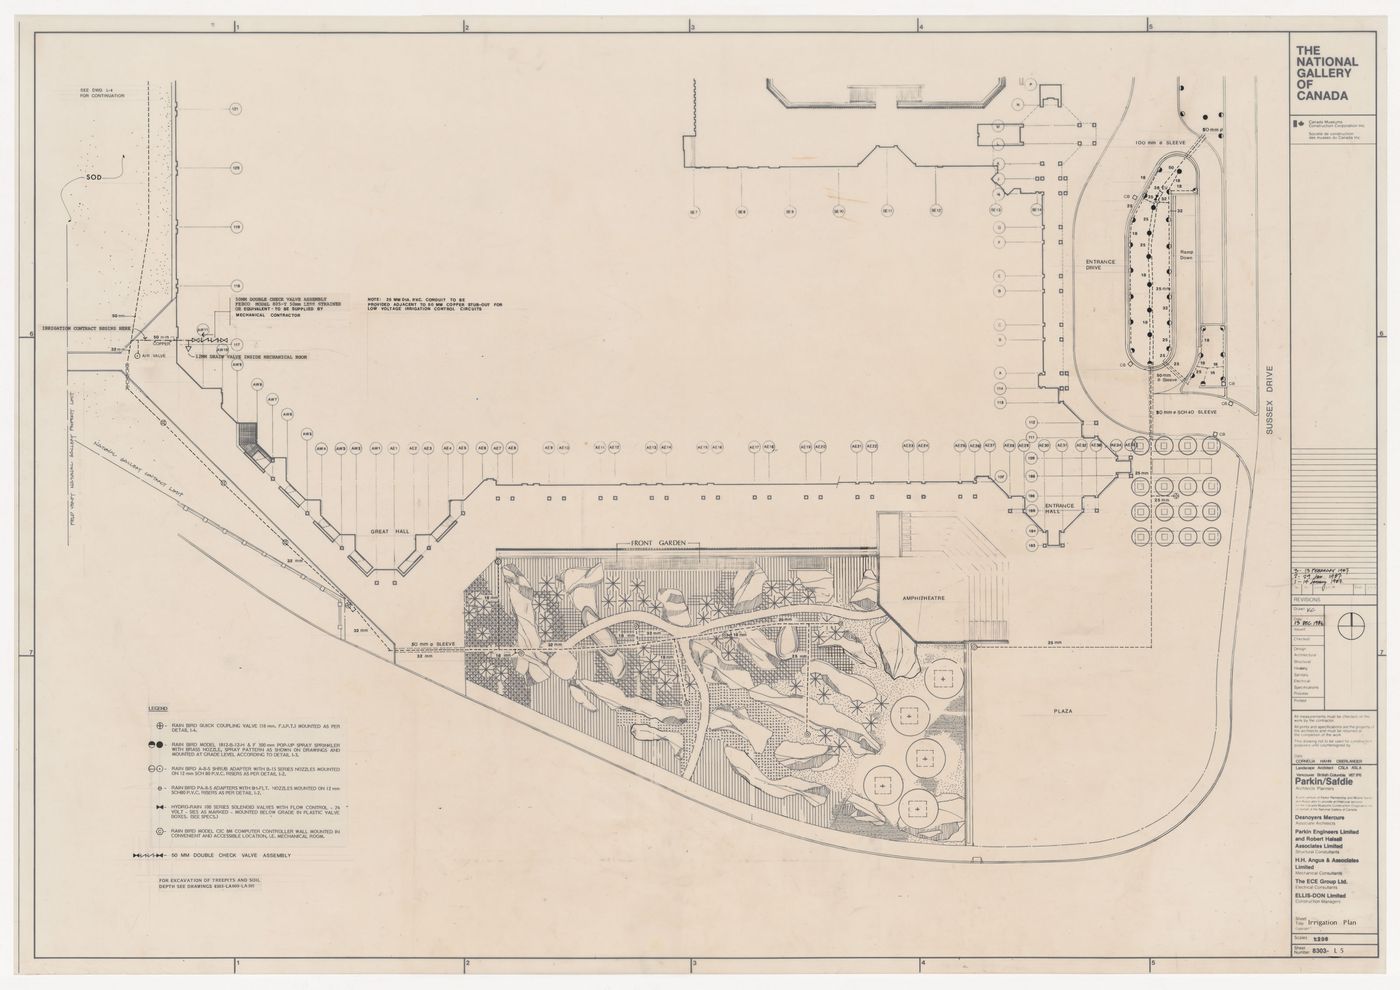 Irrigation plan for National Gallery of Canada, Ottawa, Ontario